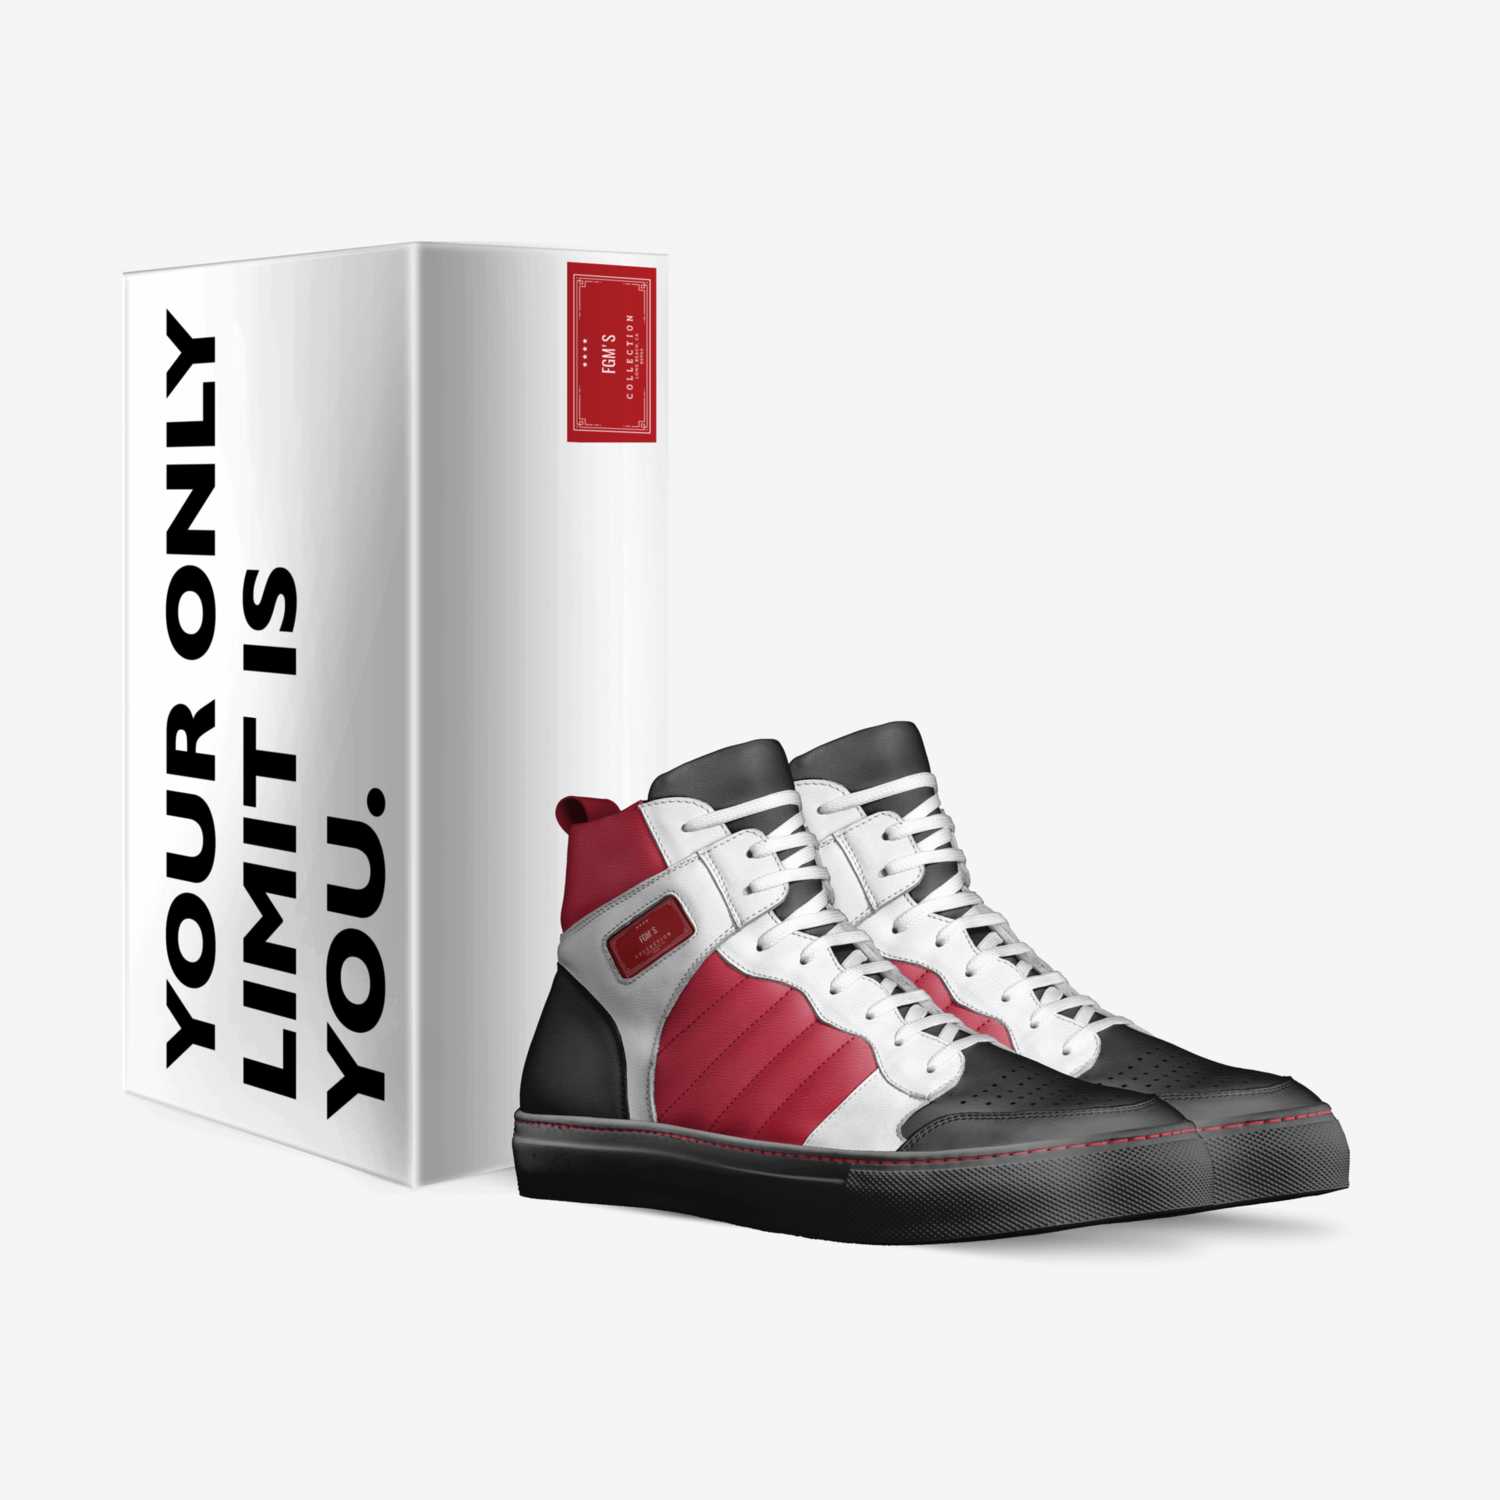 Fgm's custom made in Italy shoes by Rodney Rogers | Box view